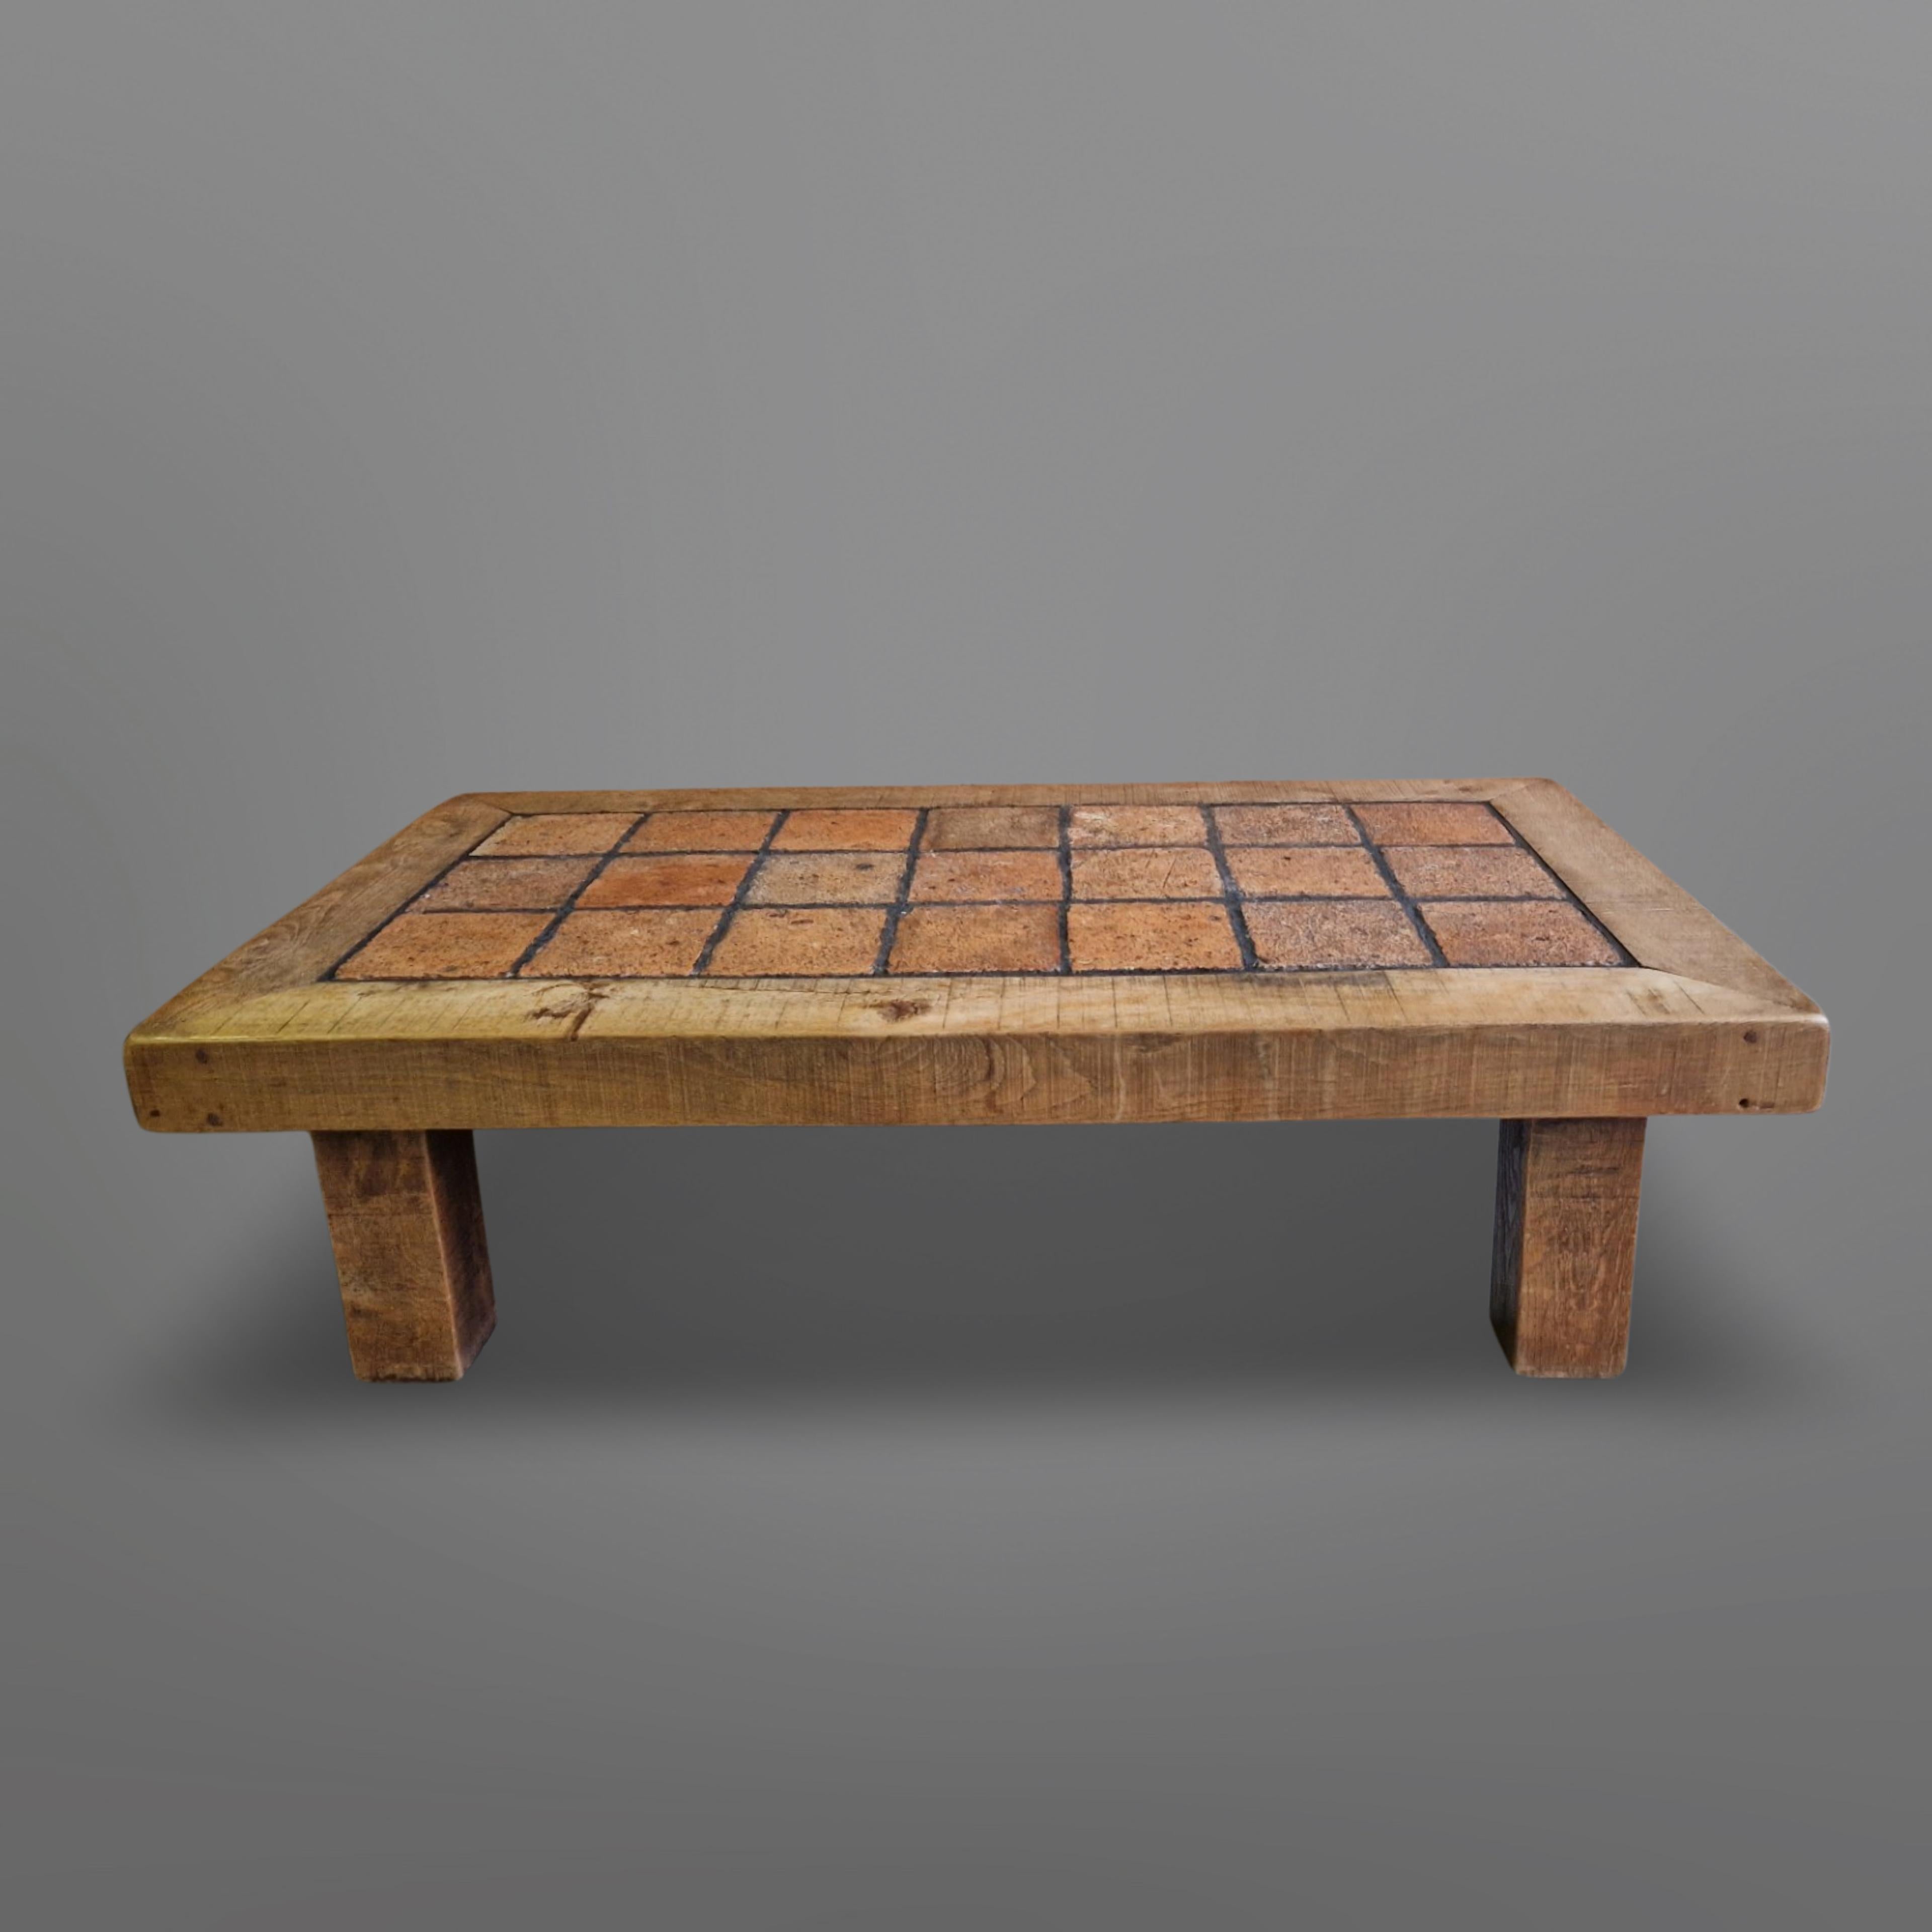 20th Century Artisan solid oak and terracotta coffee table, Netherlands 1970s